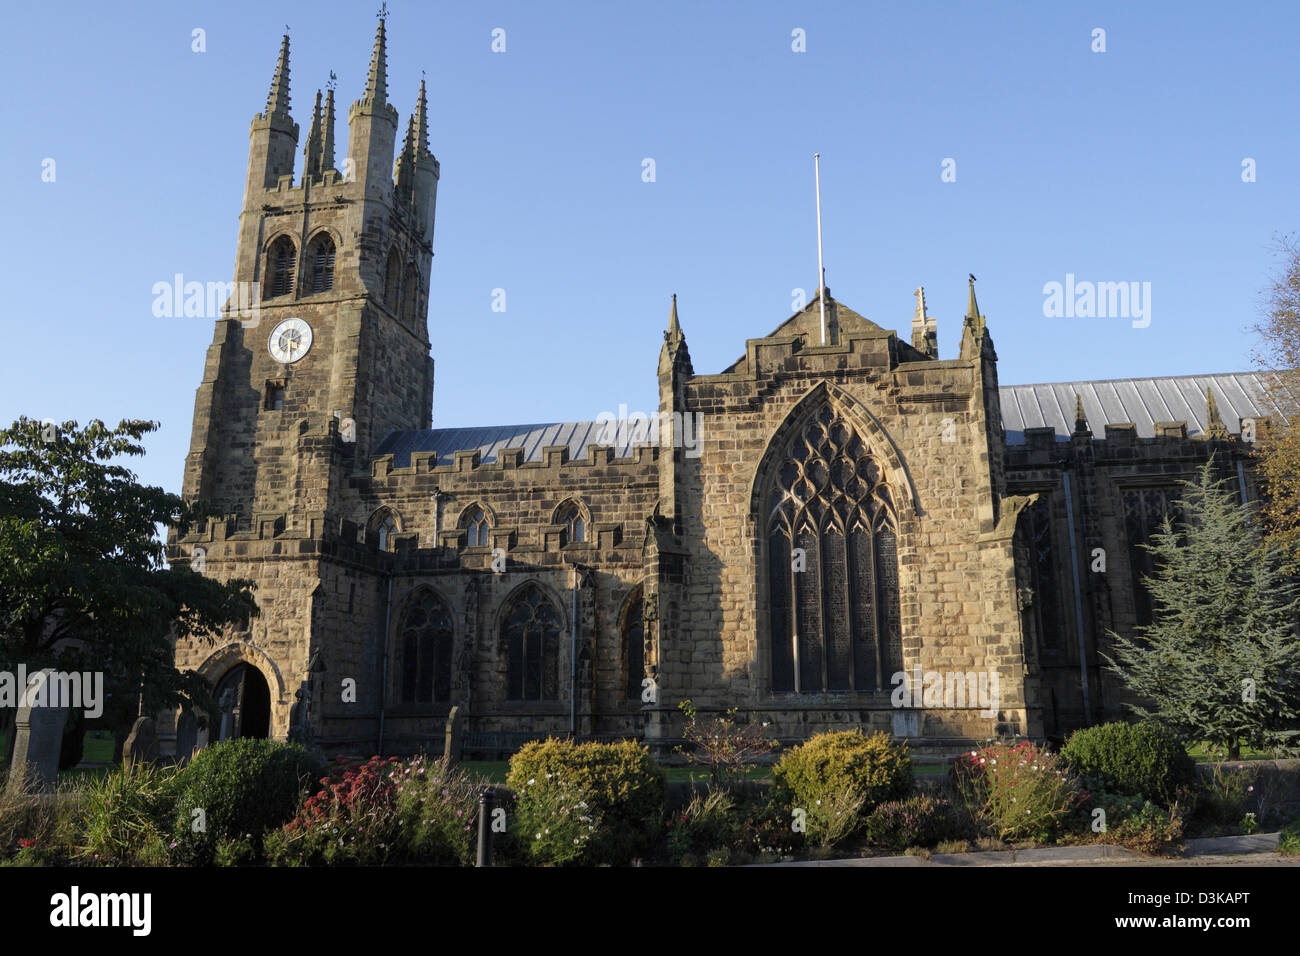 Tideswell church in the Derbyshire Peak District England UK. Rural village church grade I listed building Stock Photo